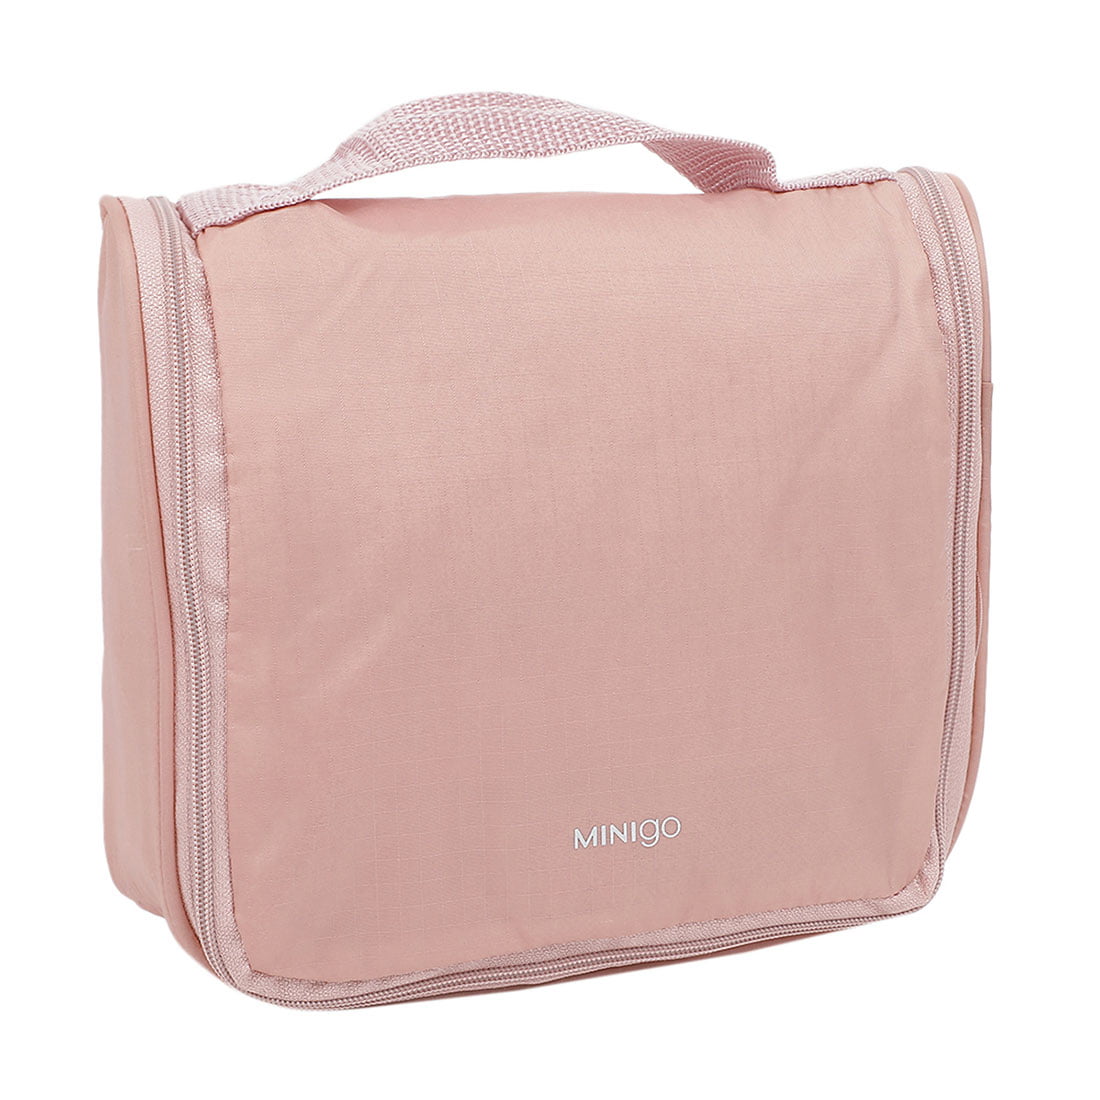 MINISO Travel Bags for Luggage Foldable Portable Toiletry